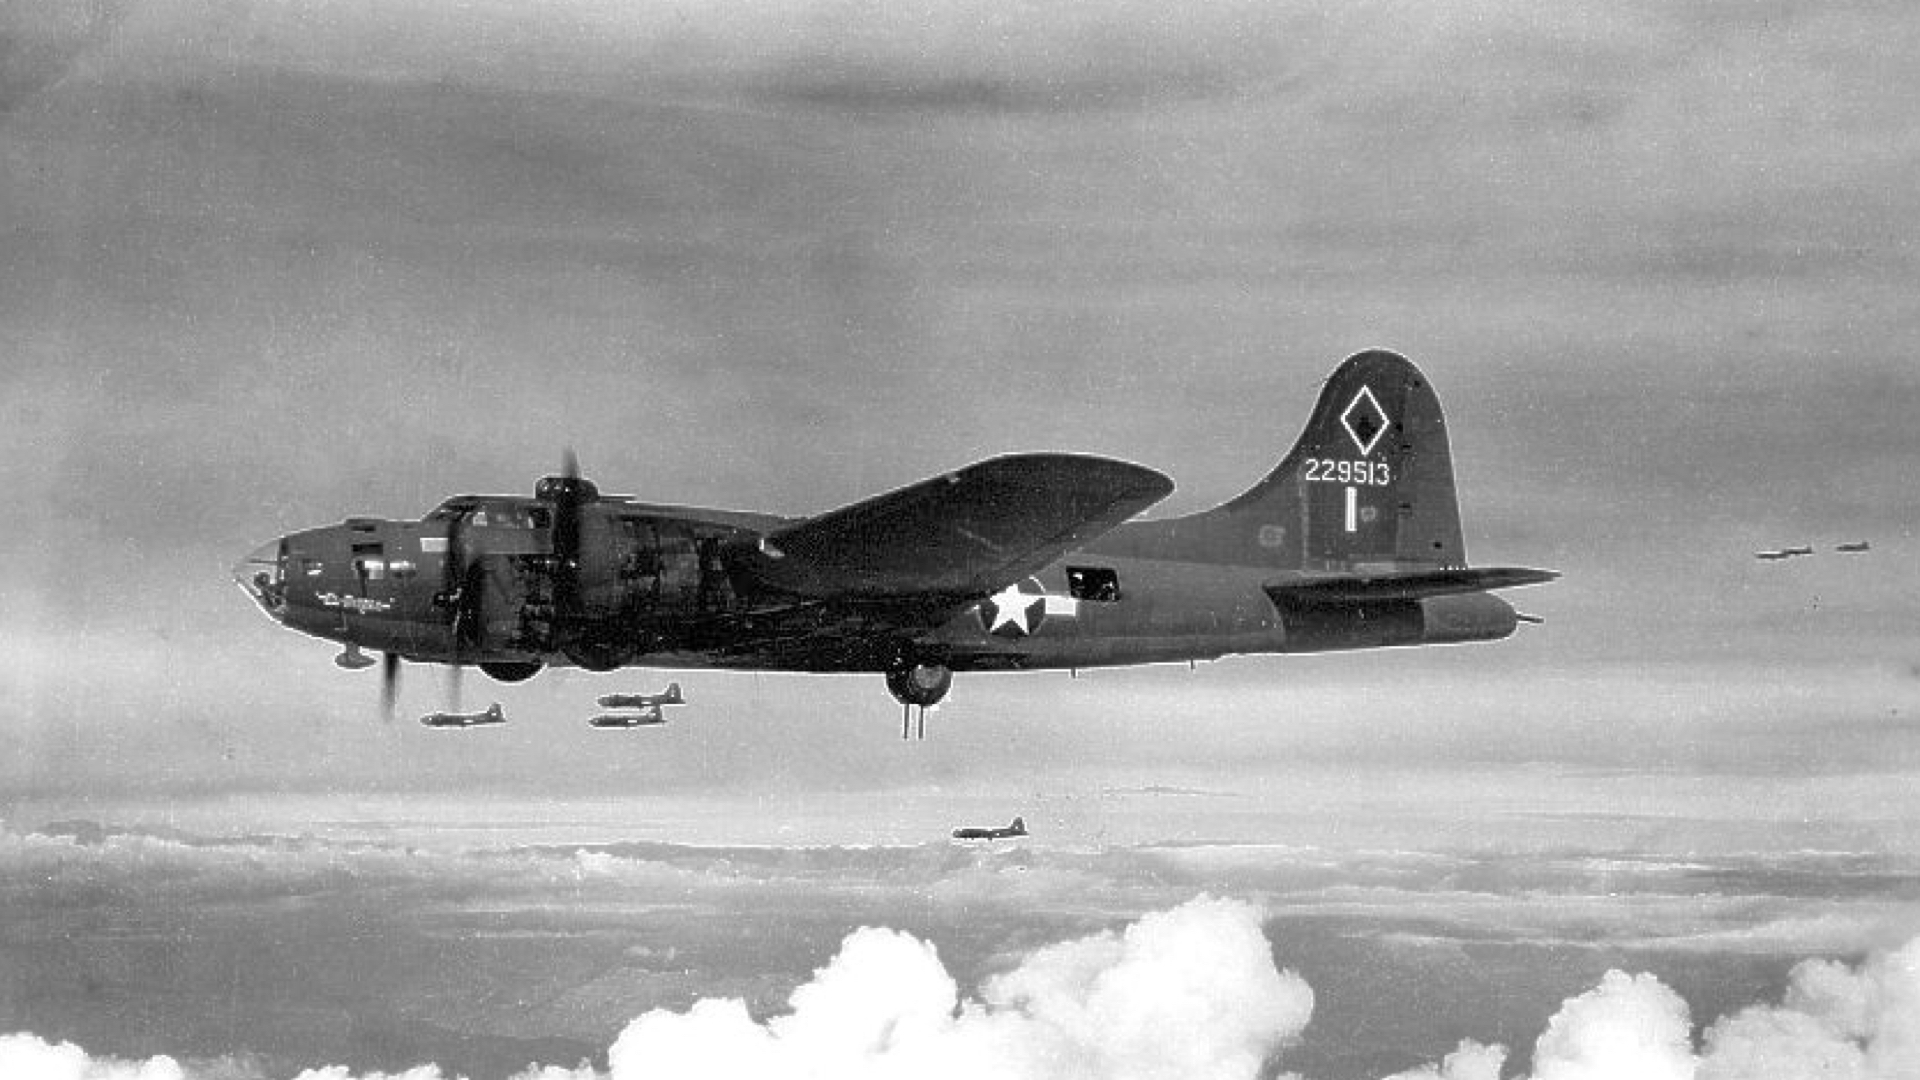 a photo of a B17 bomber in flight